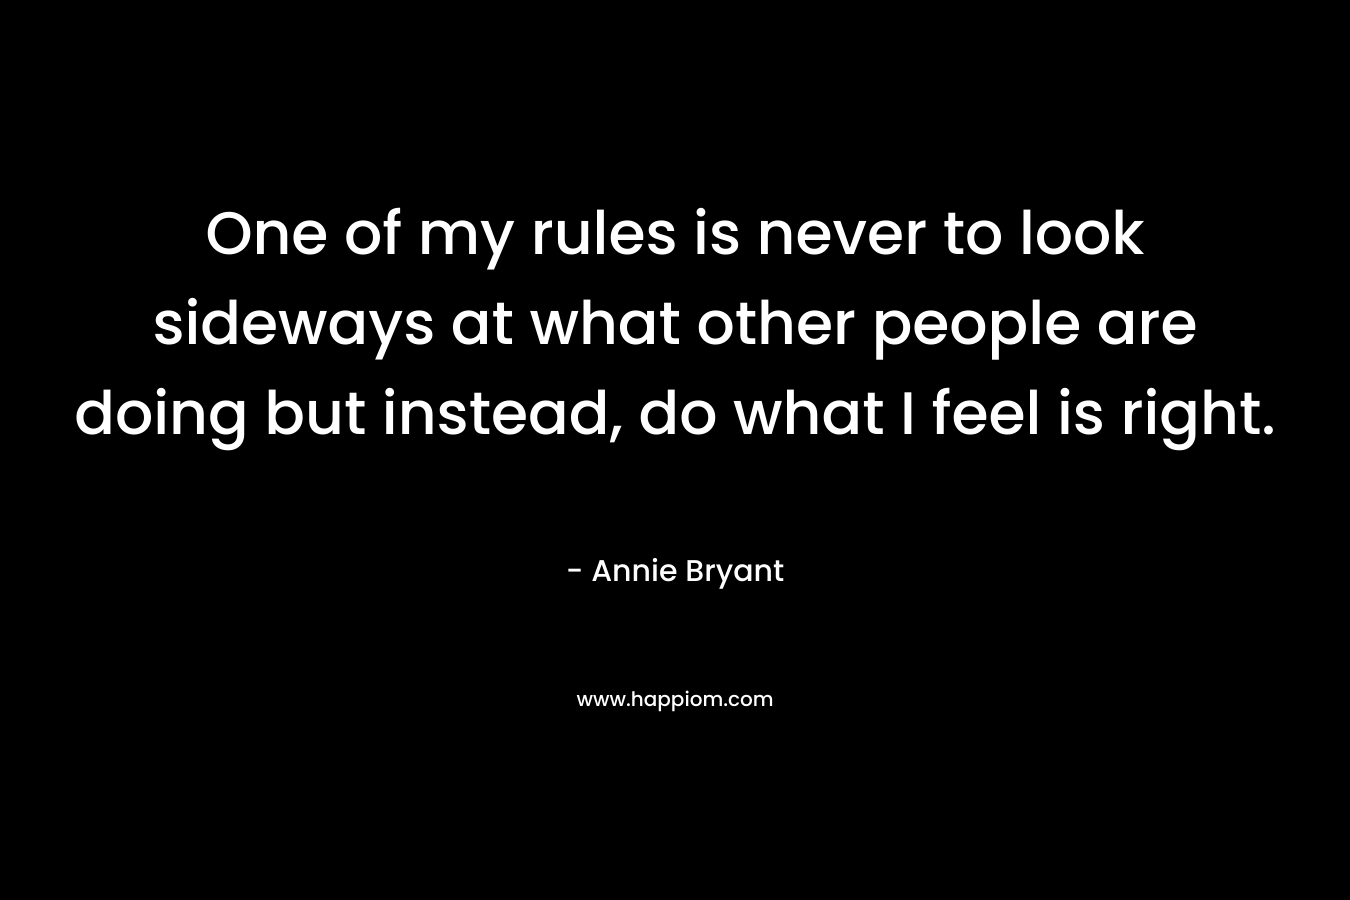 One of my rules is never to look sideways at what other people are doing but instead, do what I feel is right. – Annie Bryant